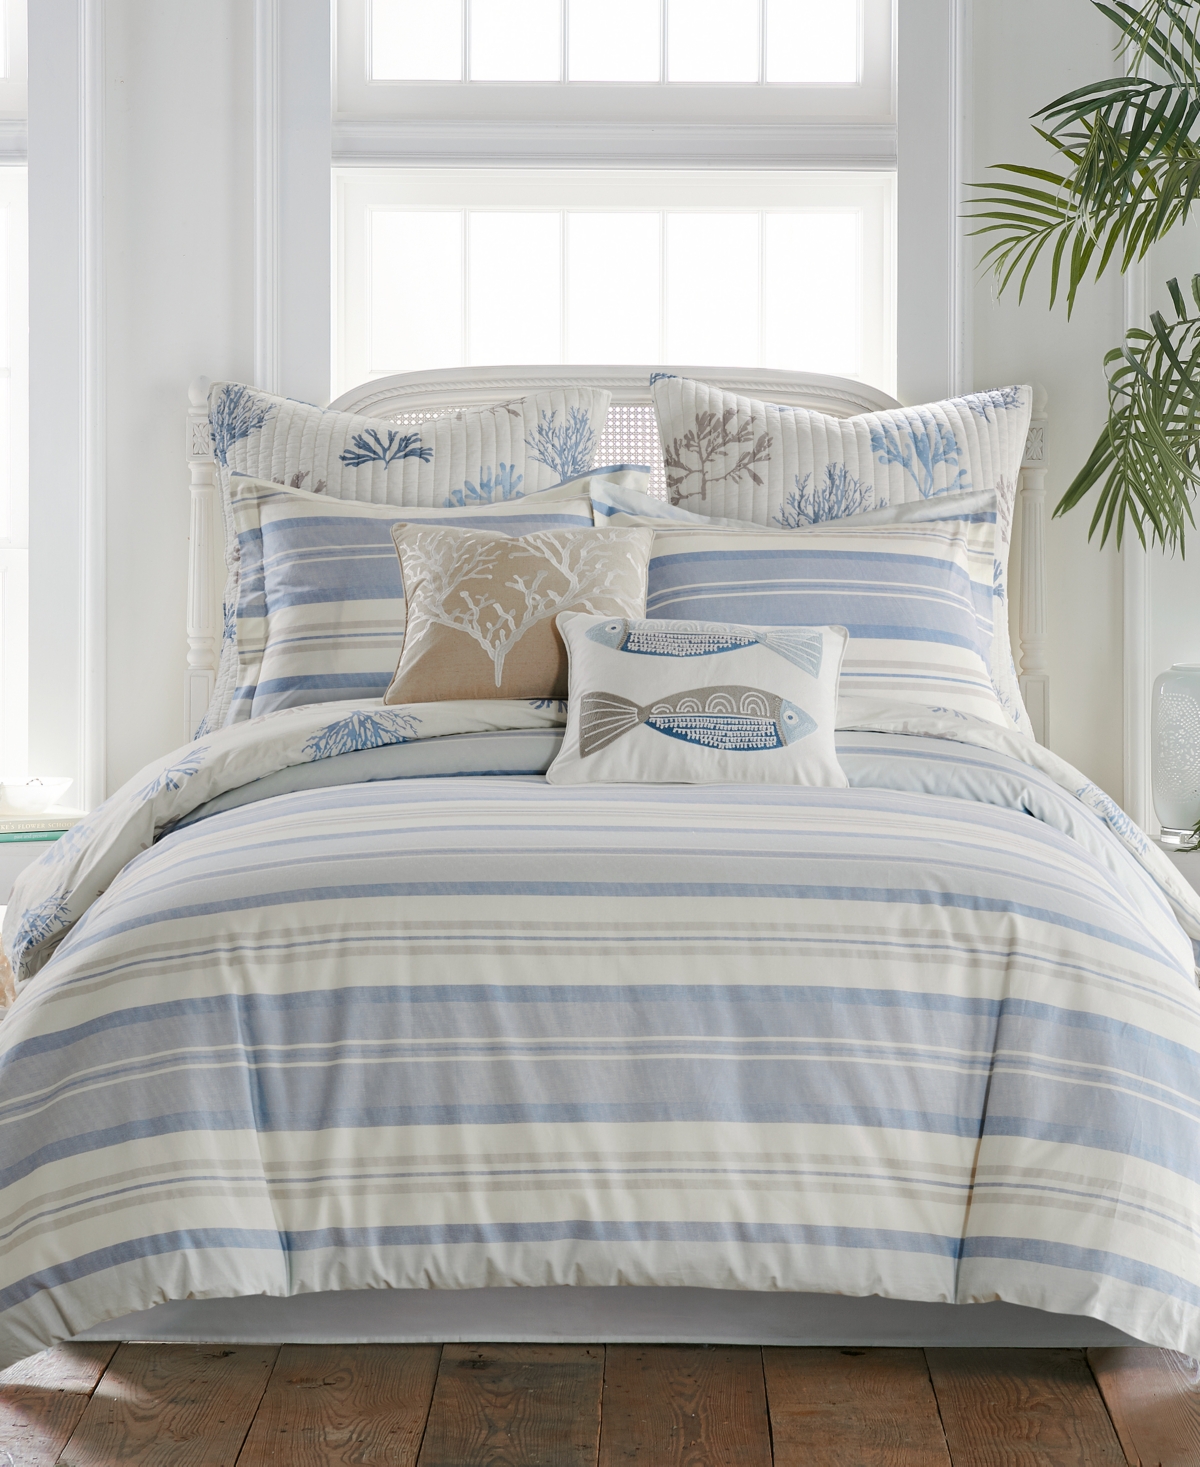 Levtex Ipanema Reversible 2-pc. Duvet Cover Set, Twin/twin Xl In Blue